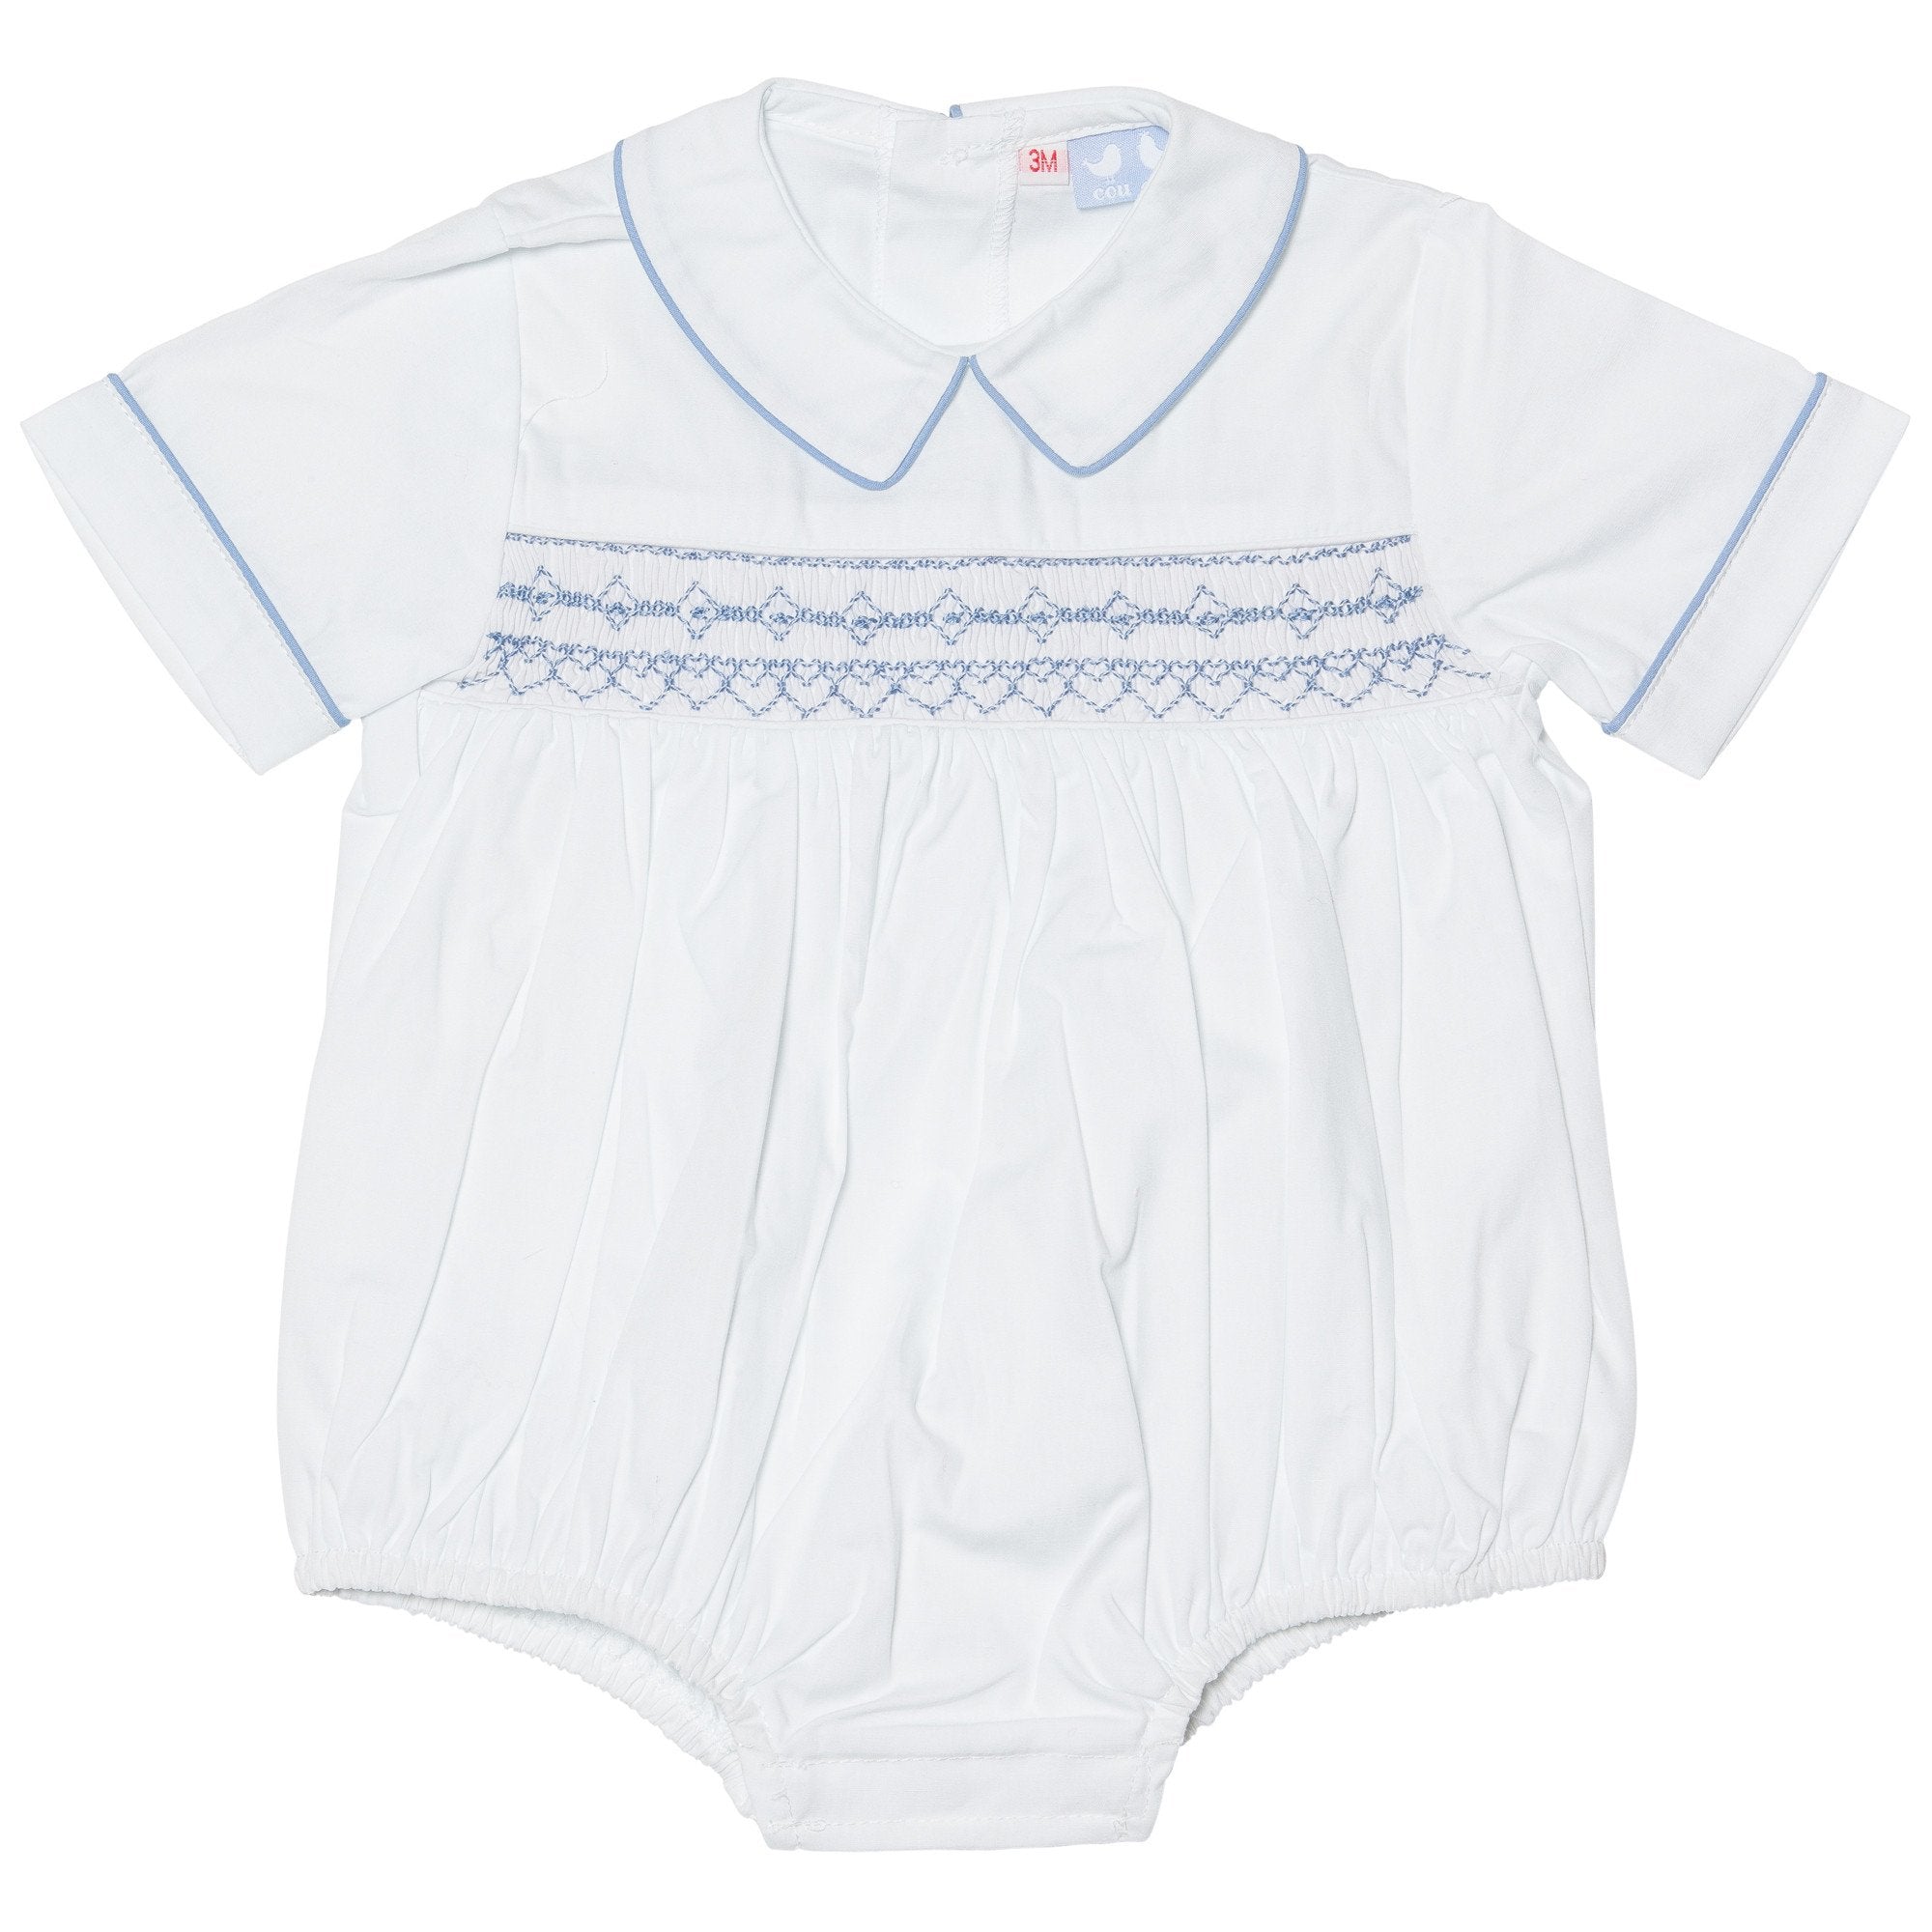 Tilly Pale Blue Smocked Romper - Cou Cou Baby